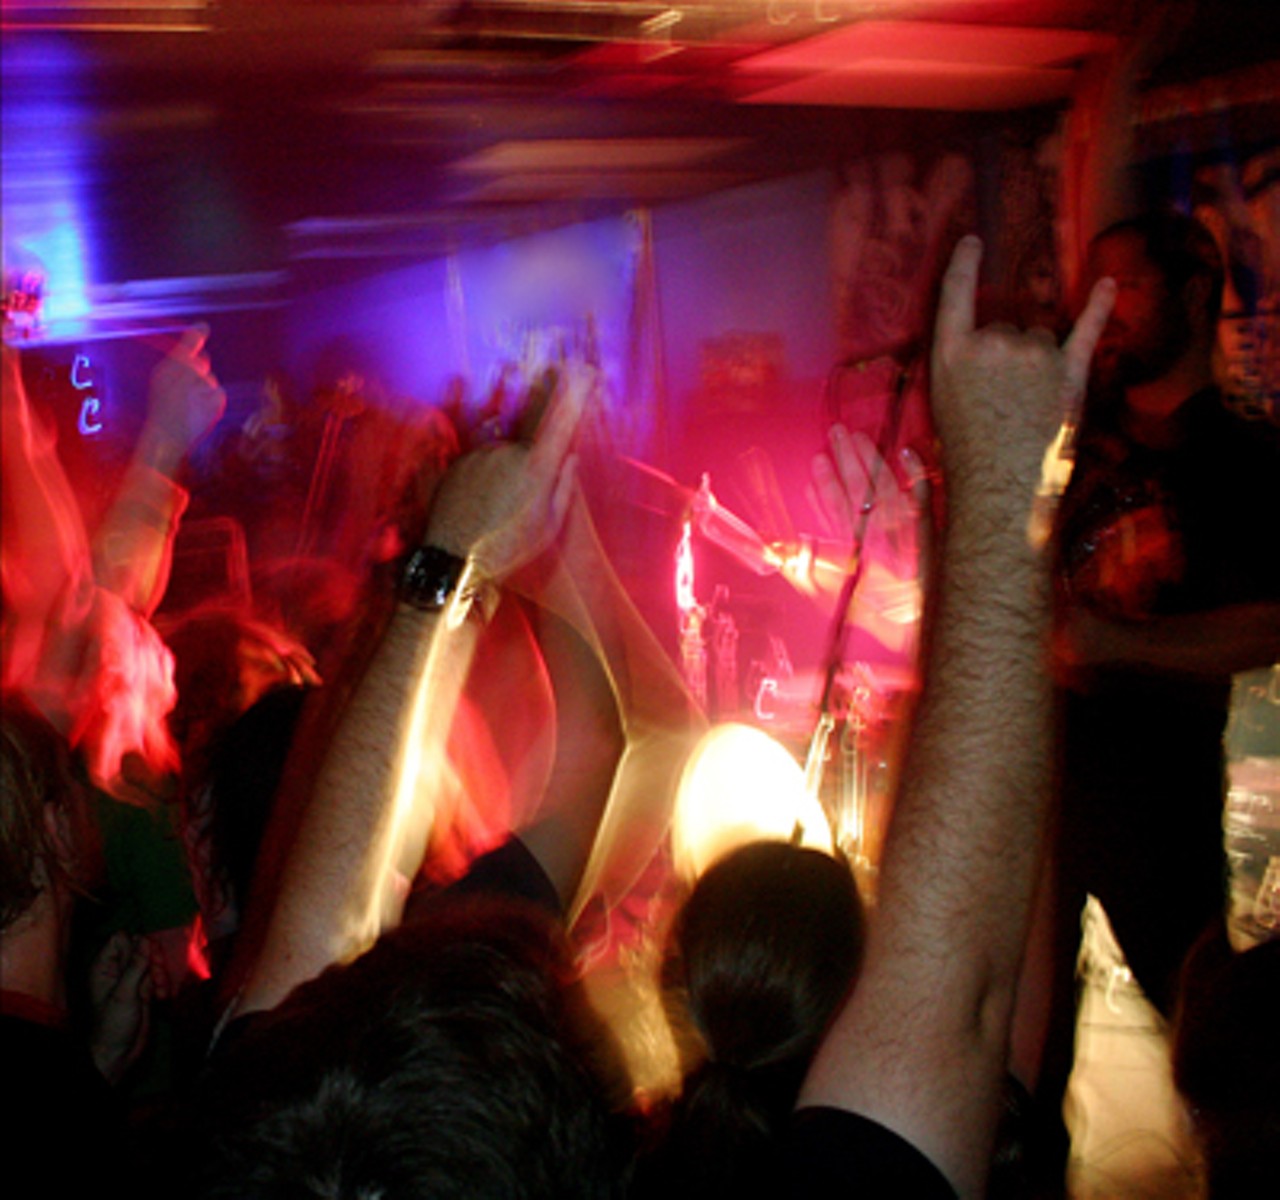 The crowd was enthusiastic during the last song at the last show by Riddle of Steel.